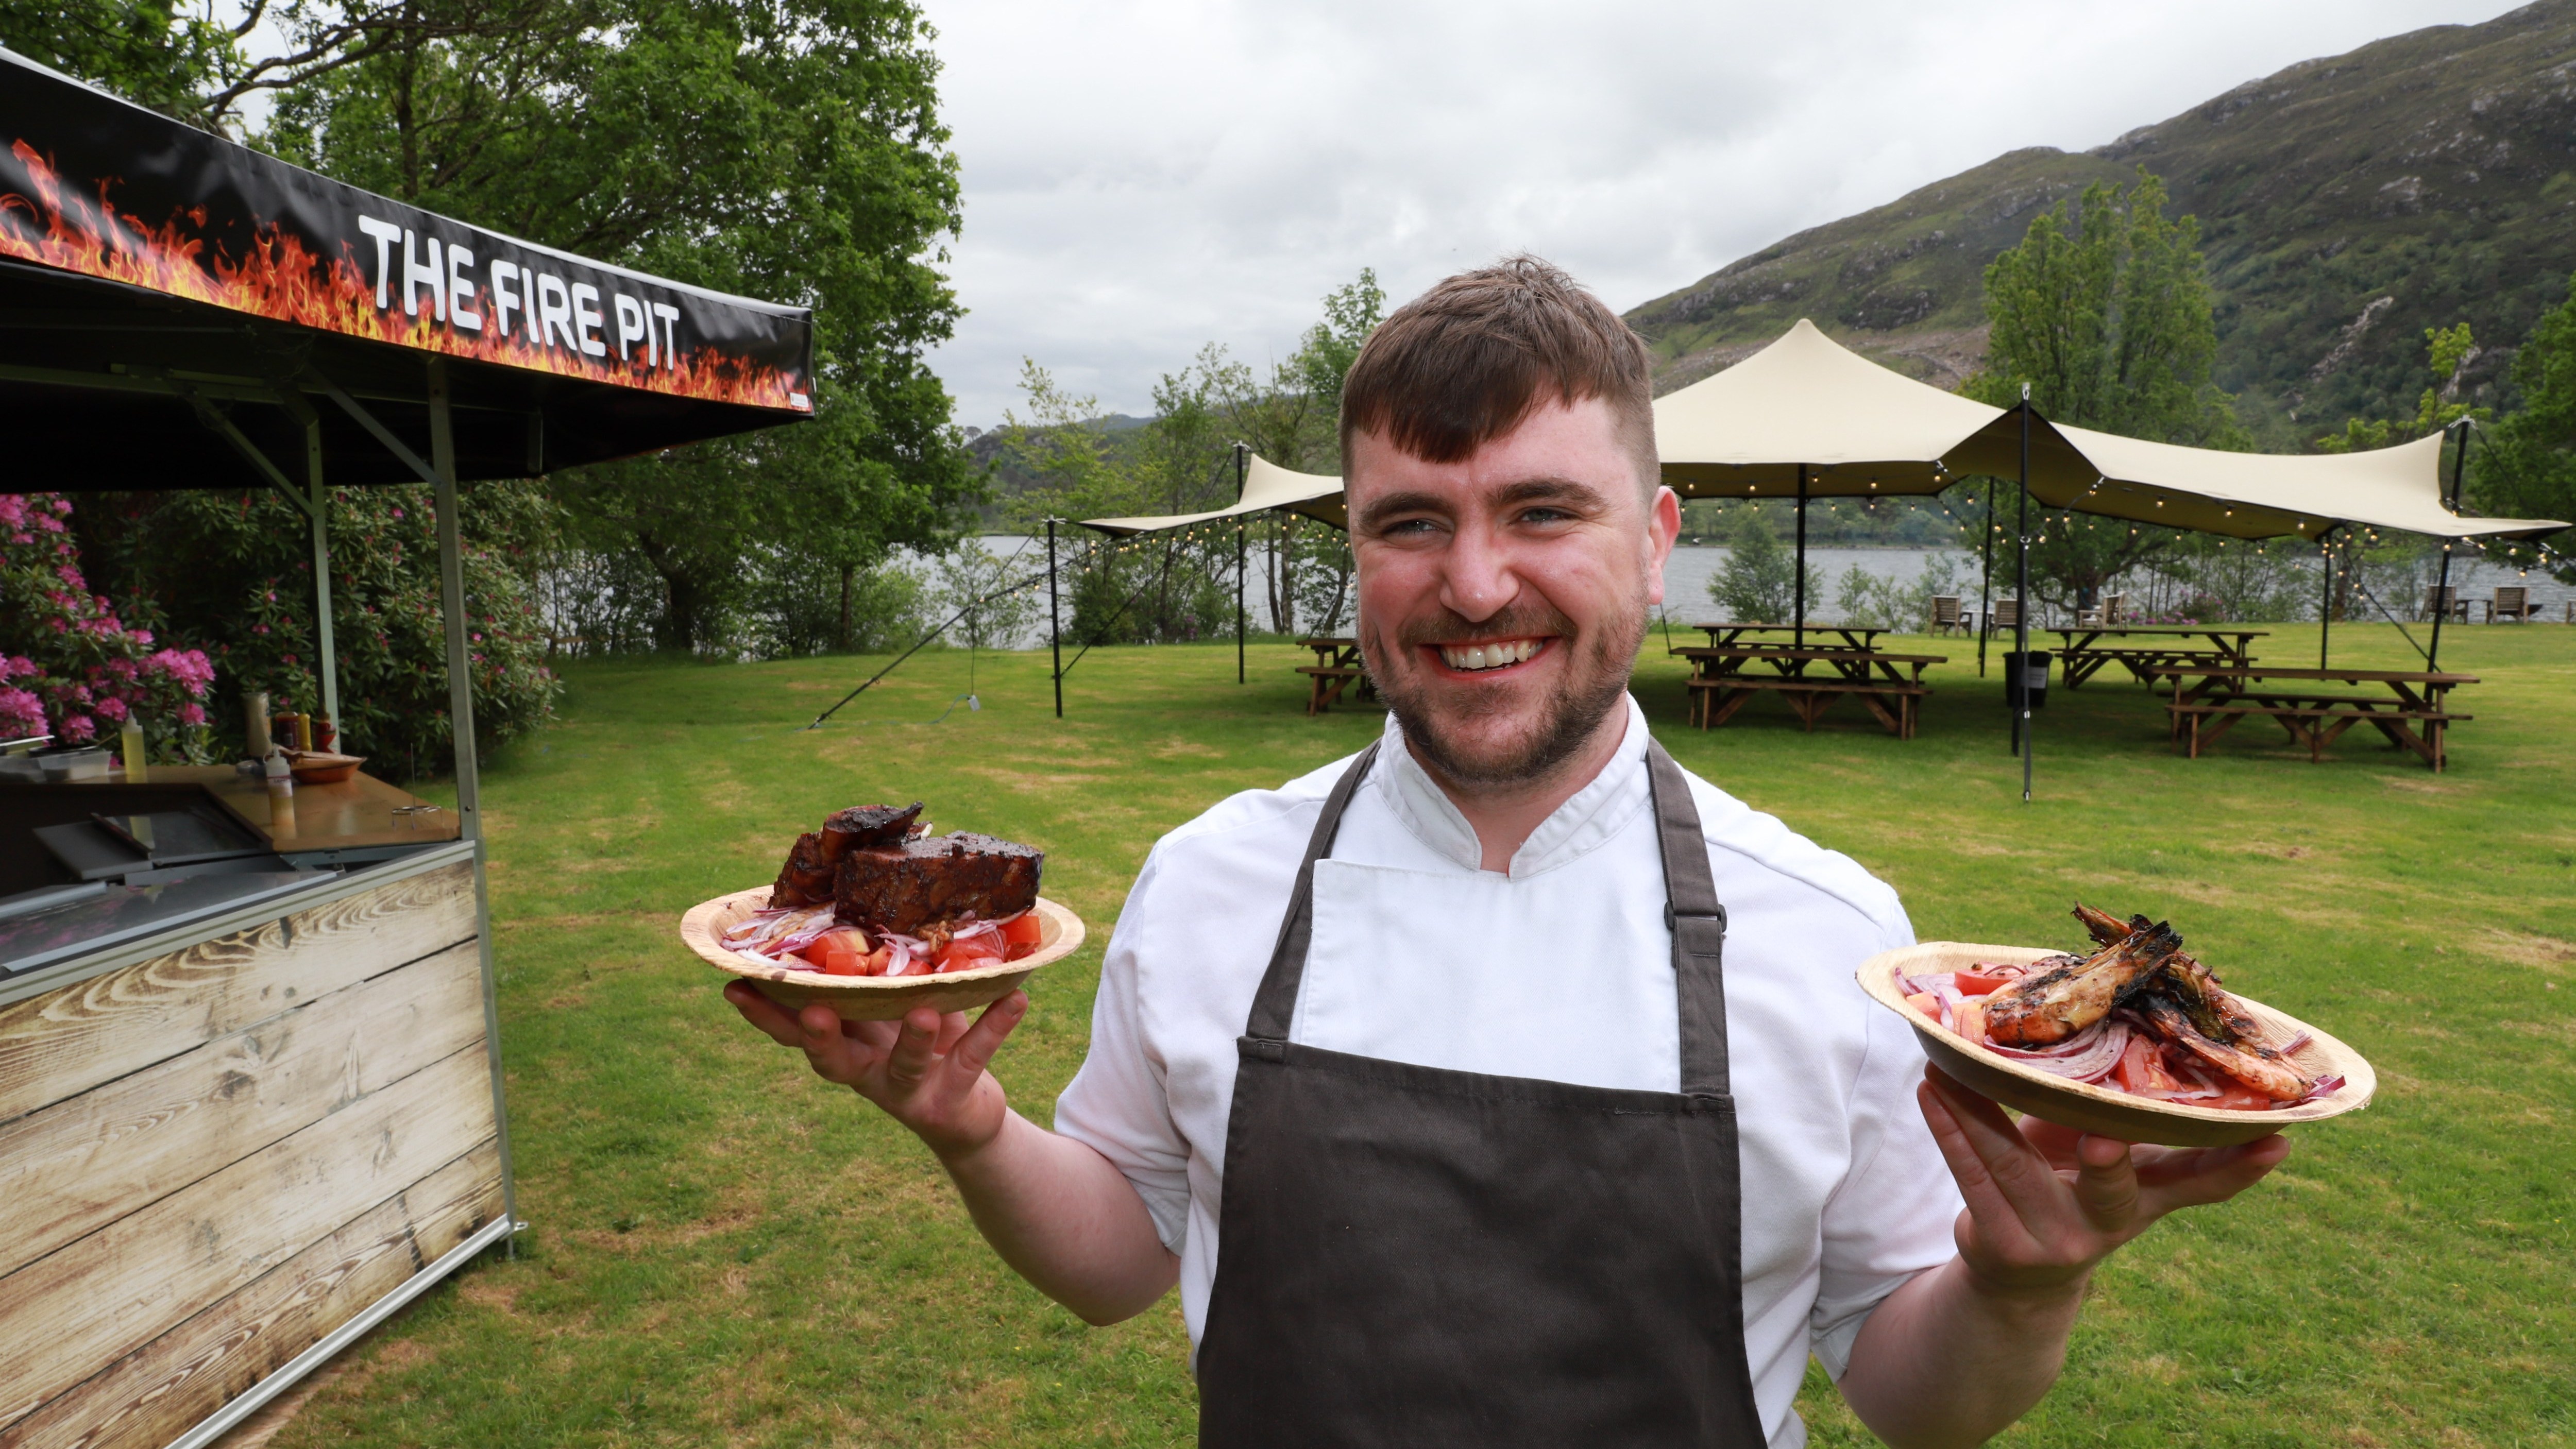 Glenfinnan House hotel has opened a new barbecue area for summer